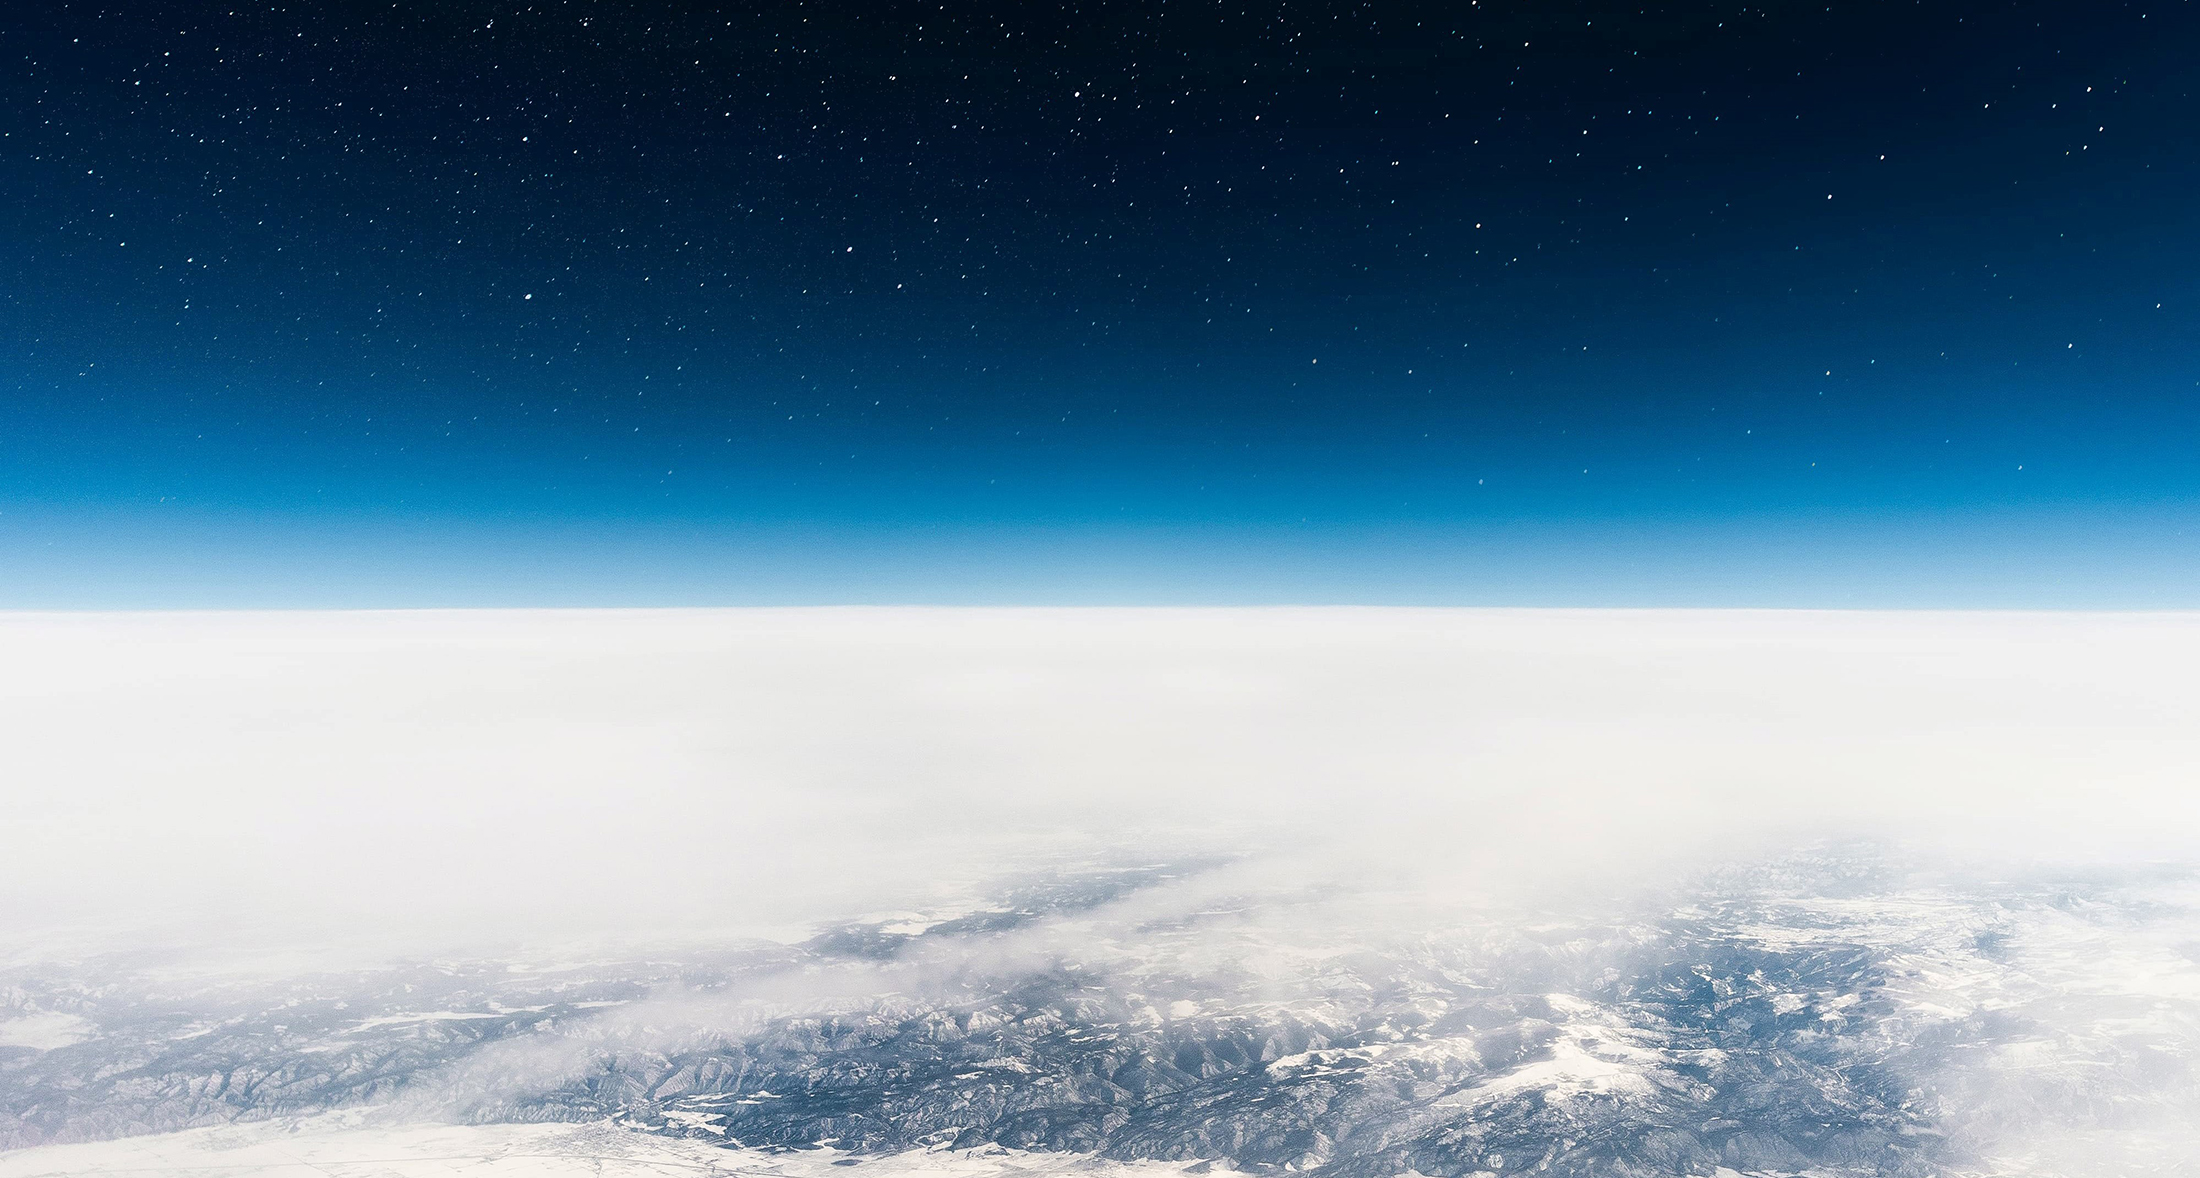 Outer space above and the white and blue surface of the Earth below